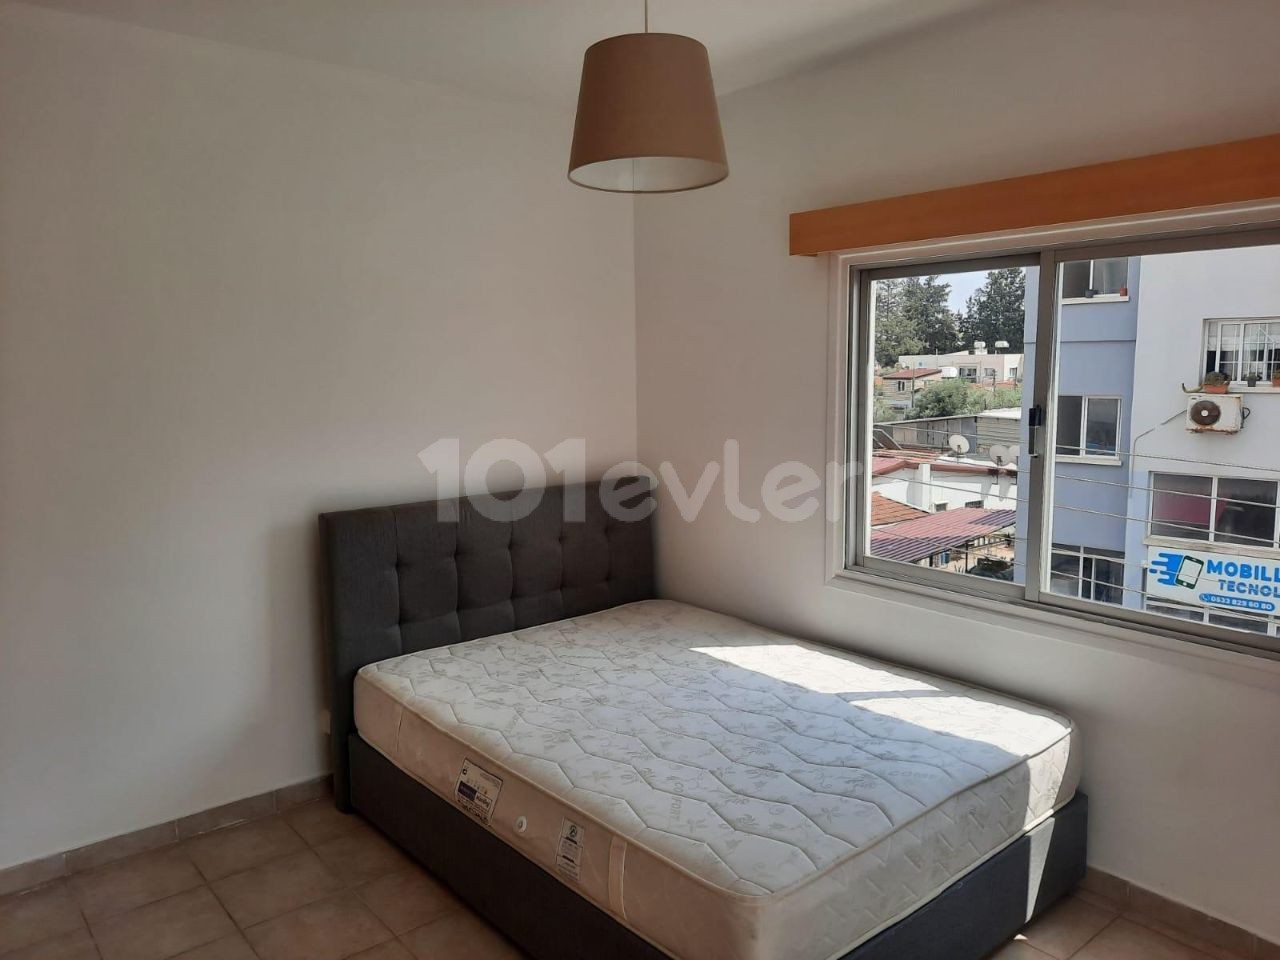 FLAT FOR RENT IN A CENTRAL LOCATION IN MARMARA REGION